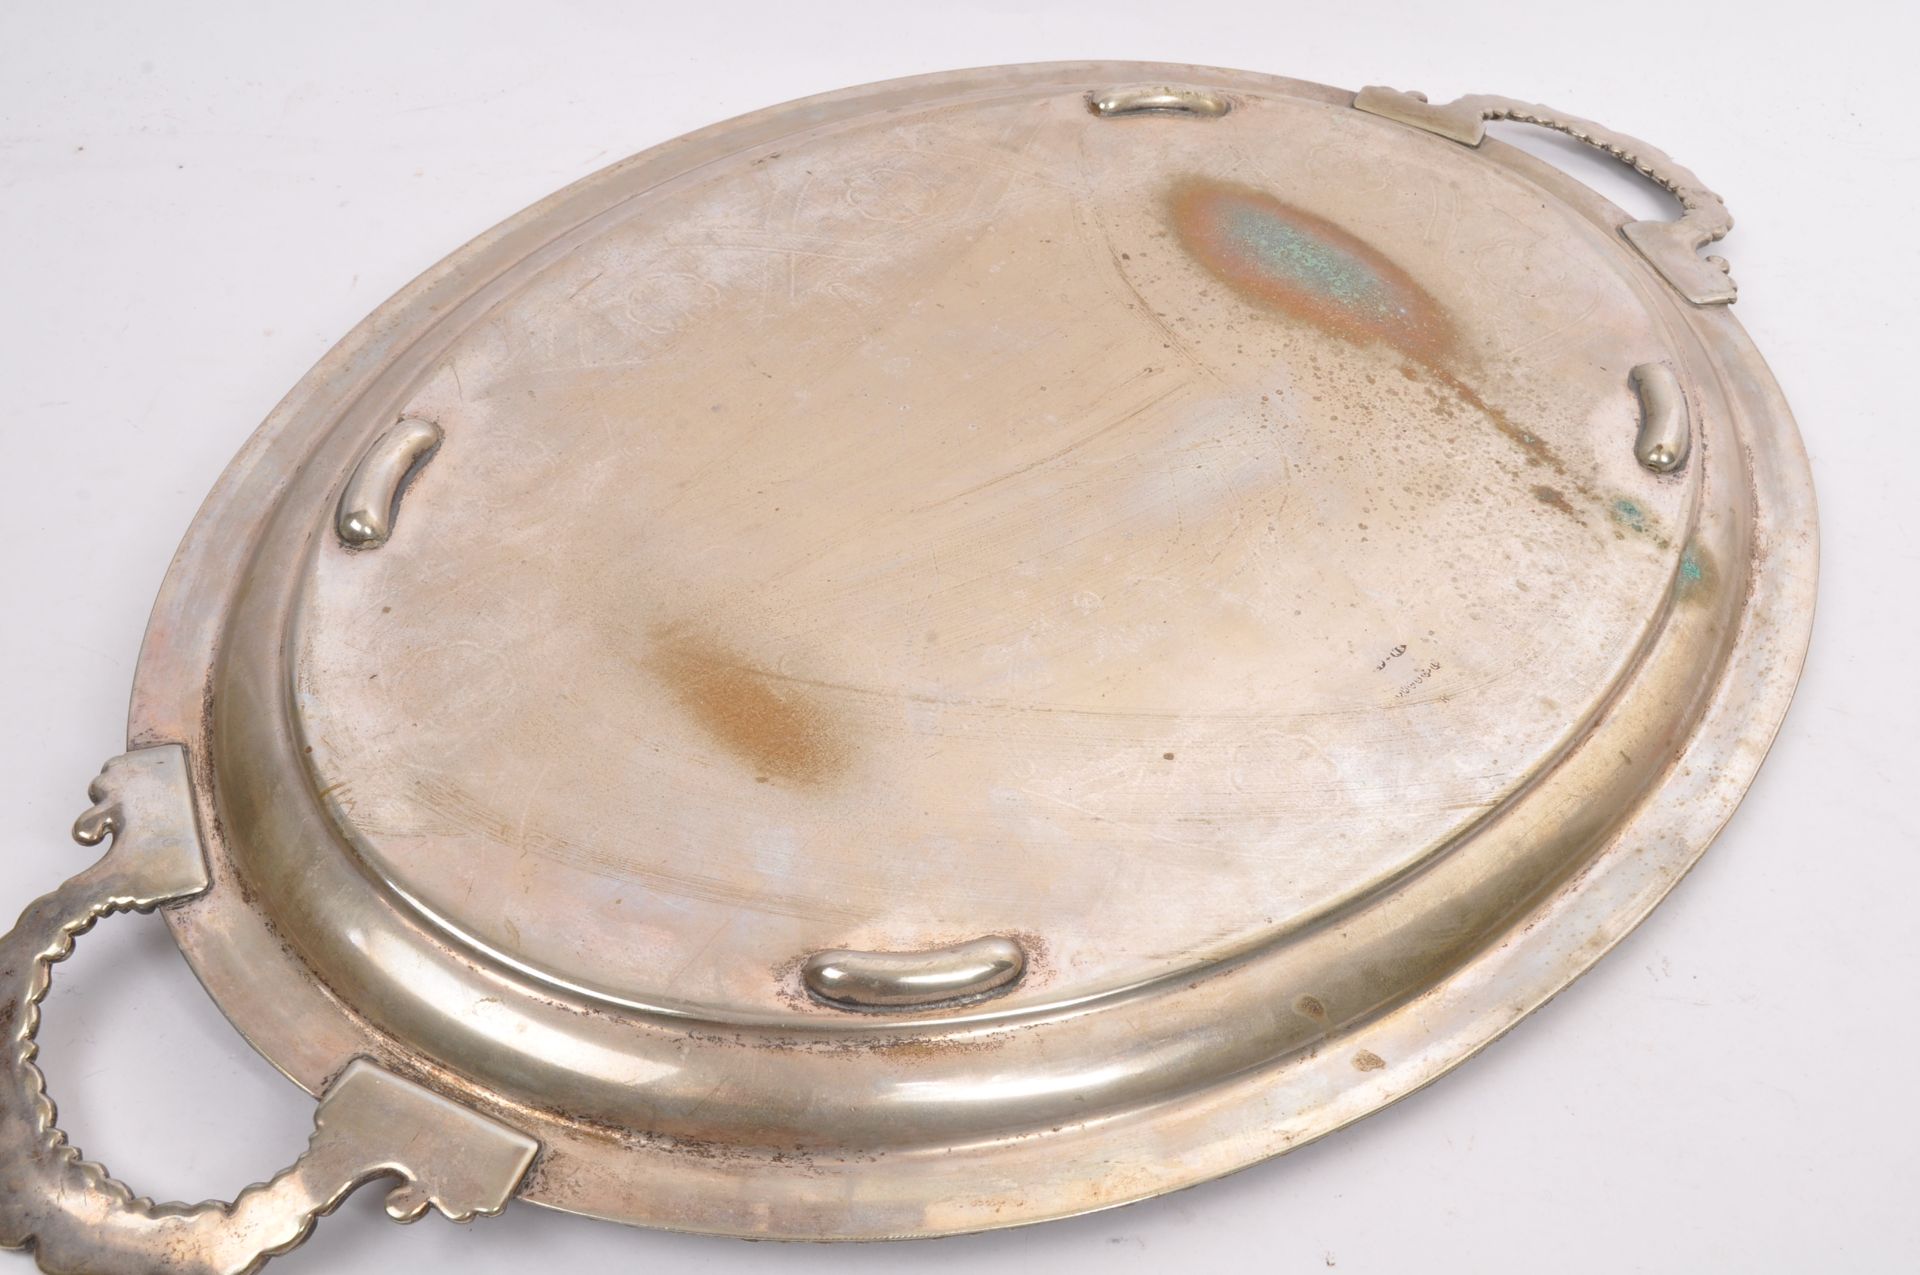 TWO LARGE VINTAGE SILVER PLATED SERVING ITEMS - Image 5 of 6